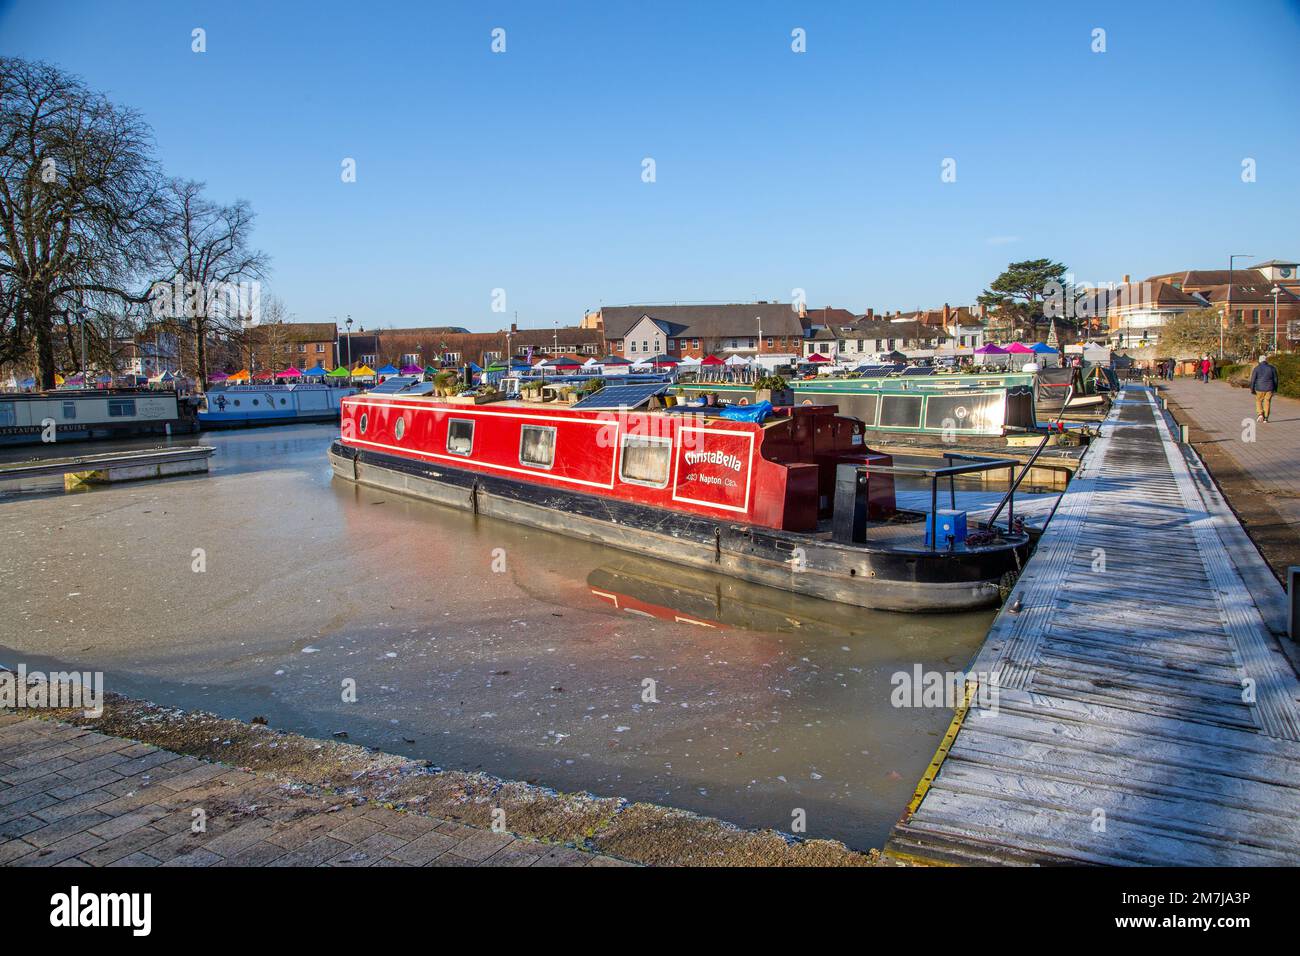 Narrowboats in the Stratford-upon-Avon Canal  marina at the Warwickshire town of Stratford on Avon Stock Photo